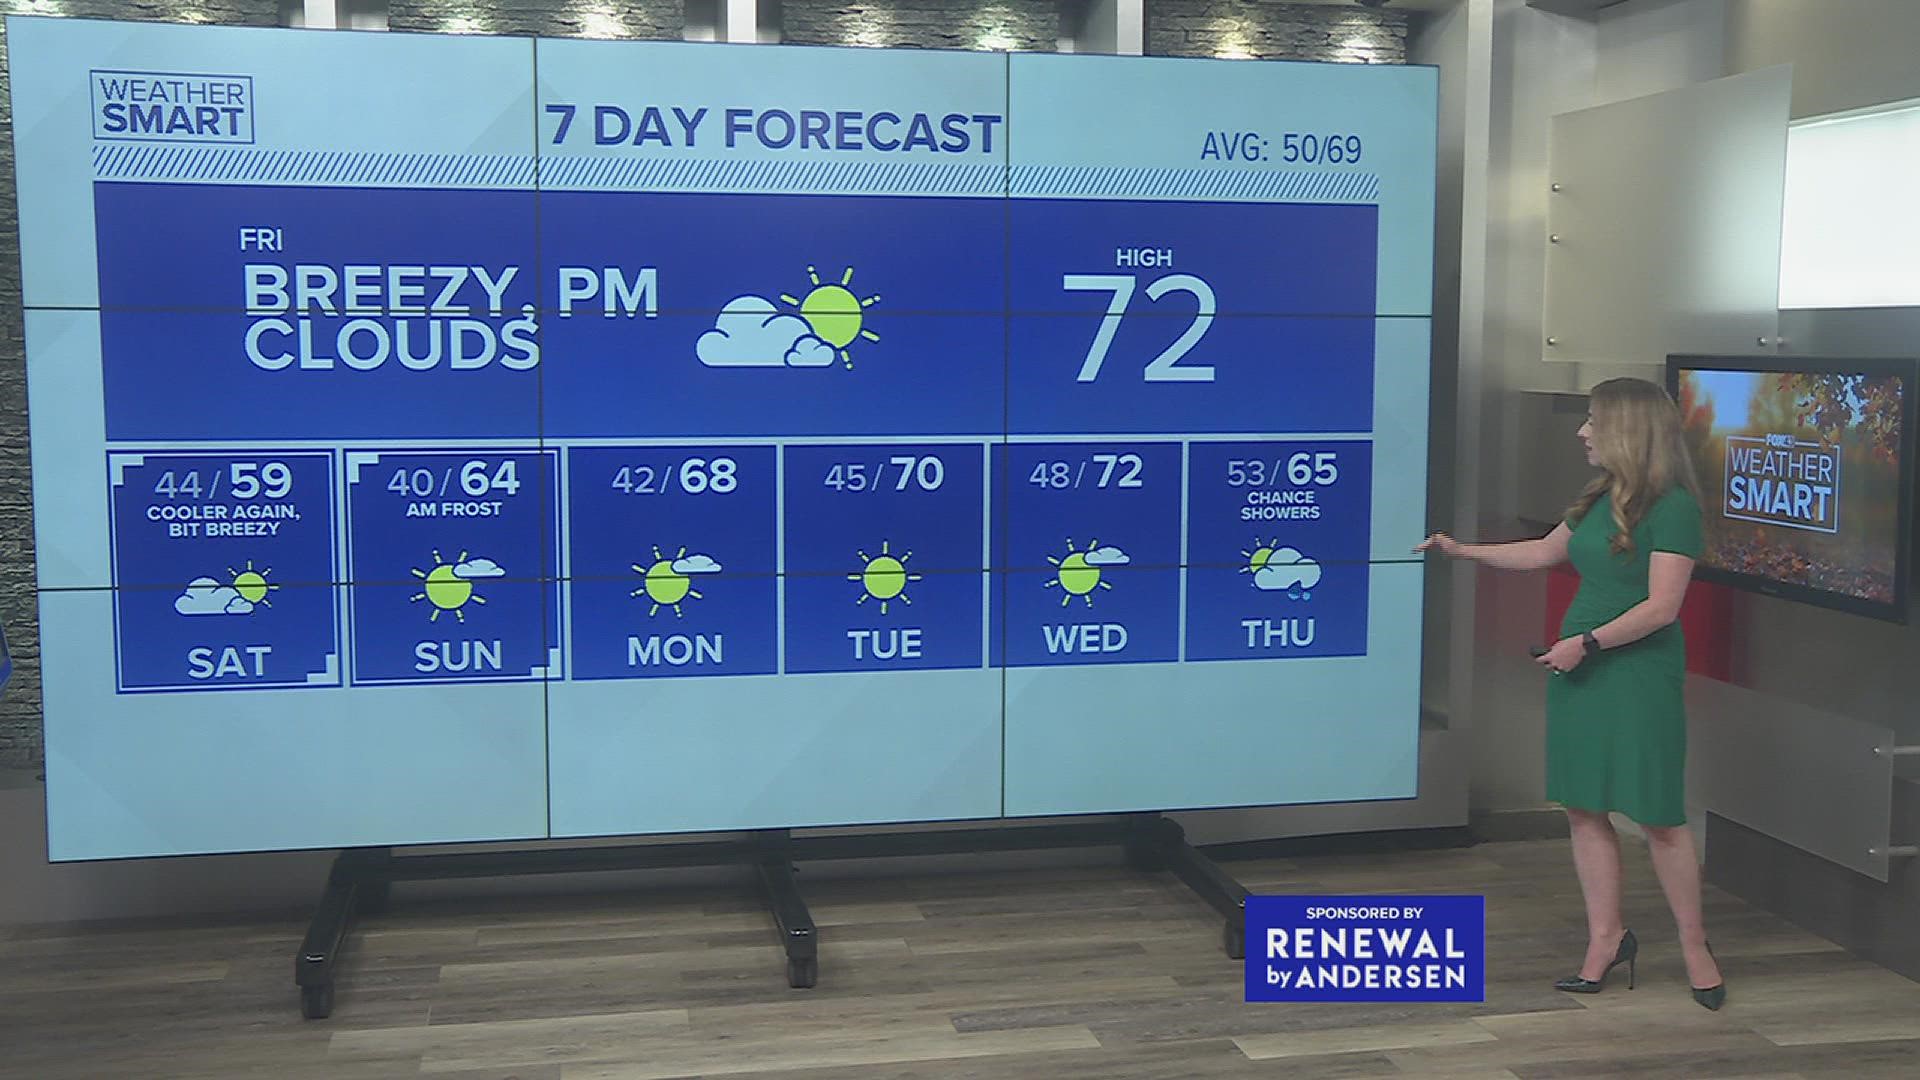 Monday morning weather and 7 day forecast